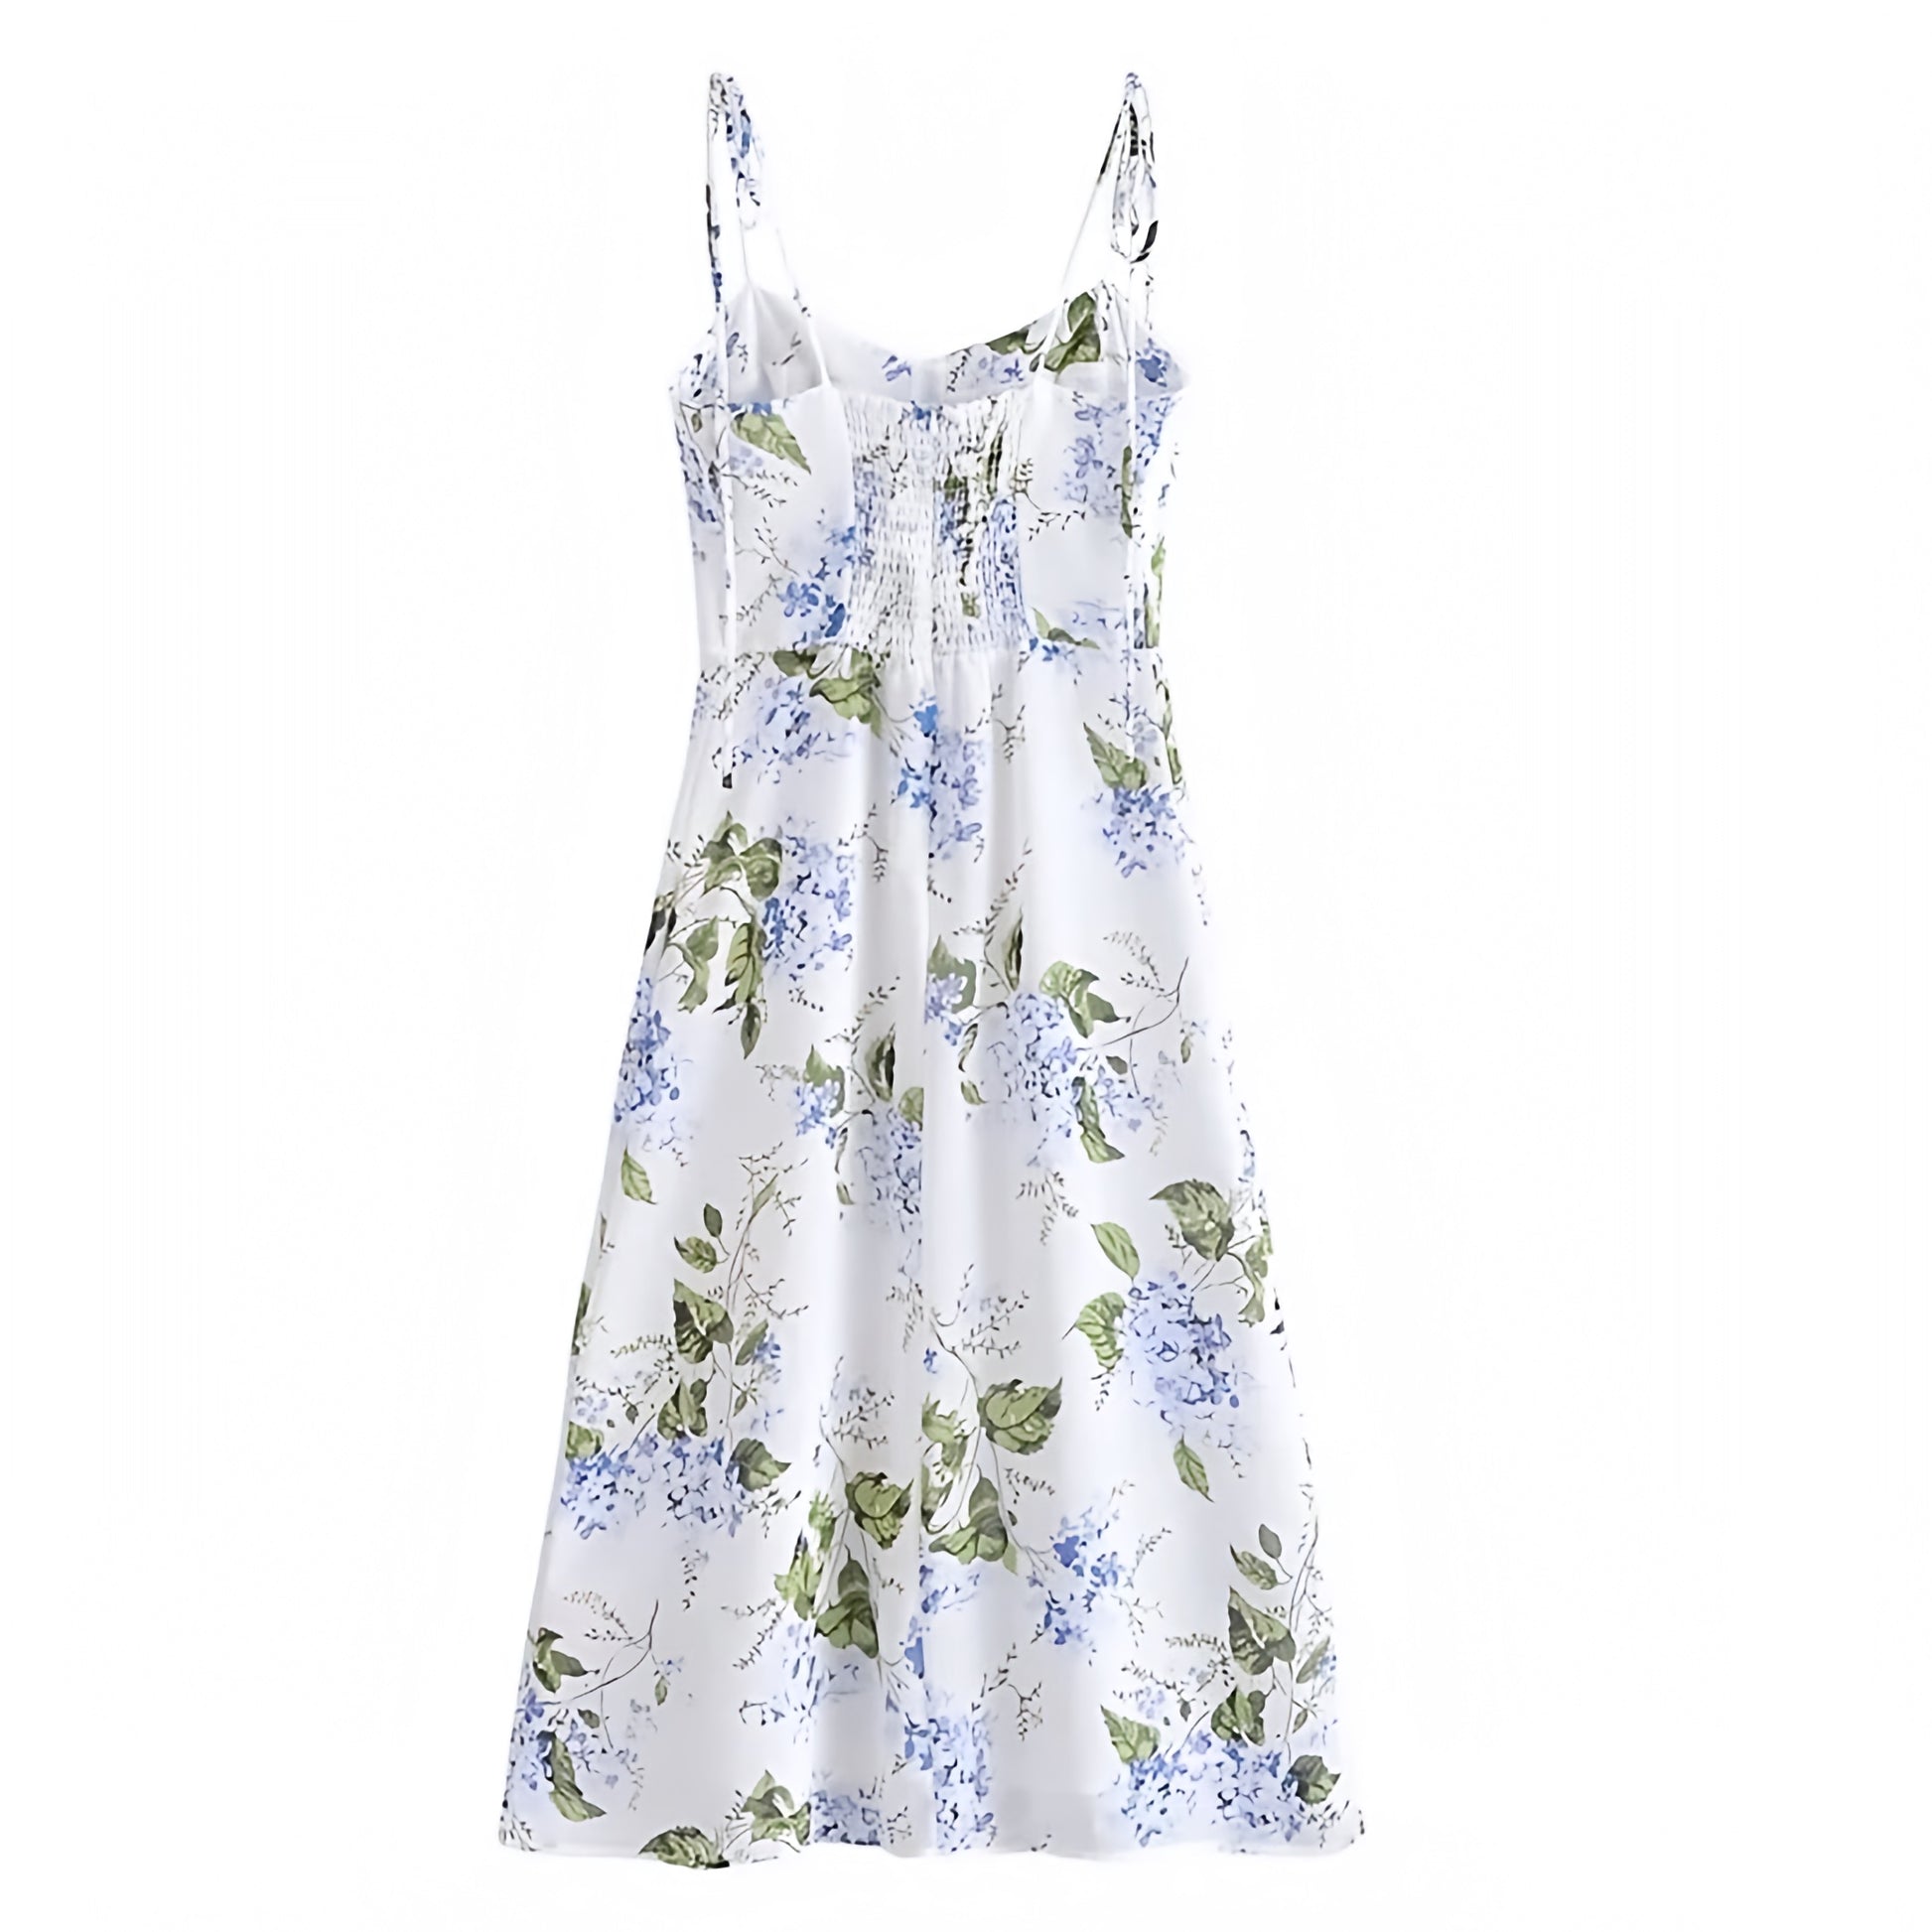 floral-print-light-blue-and-white-multi-color-hydrangea-flower-patterned-slim-fit-bodycon-round-neck-spaghetti-strap-sleeveless-backless-open-back-petite-linen-midi-long-maxi-dress-ball-gown-women-ladies-chic-trendy-spring-2024-summer-elegant-casual-classy-feminine-semi-formal-prom-gala-party-preppy-style-beach-wear-vacation-sundress-coastal-granddaughter-hamptons-zara-revolve-loveshackfancy-altard-state-urban-outfitters-reformation-prettylittlething-princess-polly-hill-house-dupe